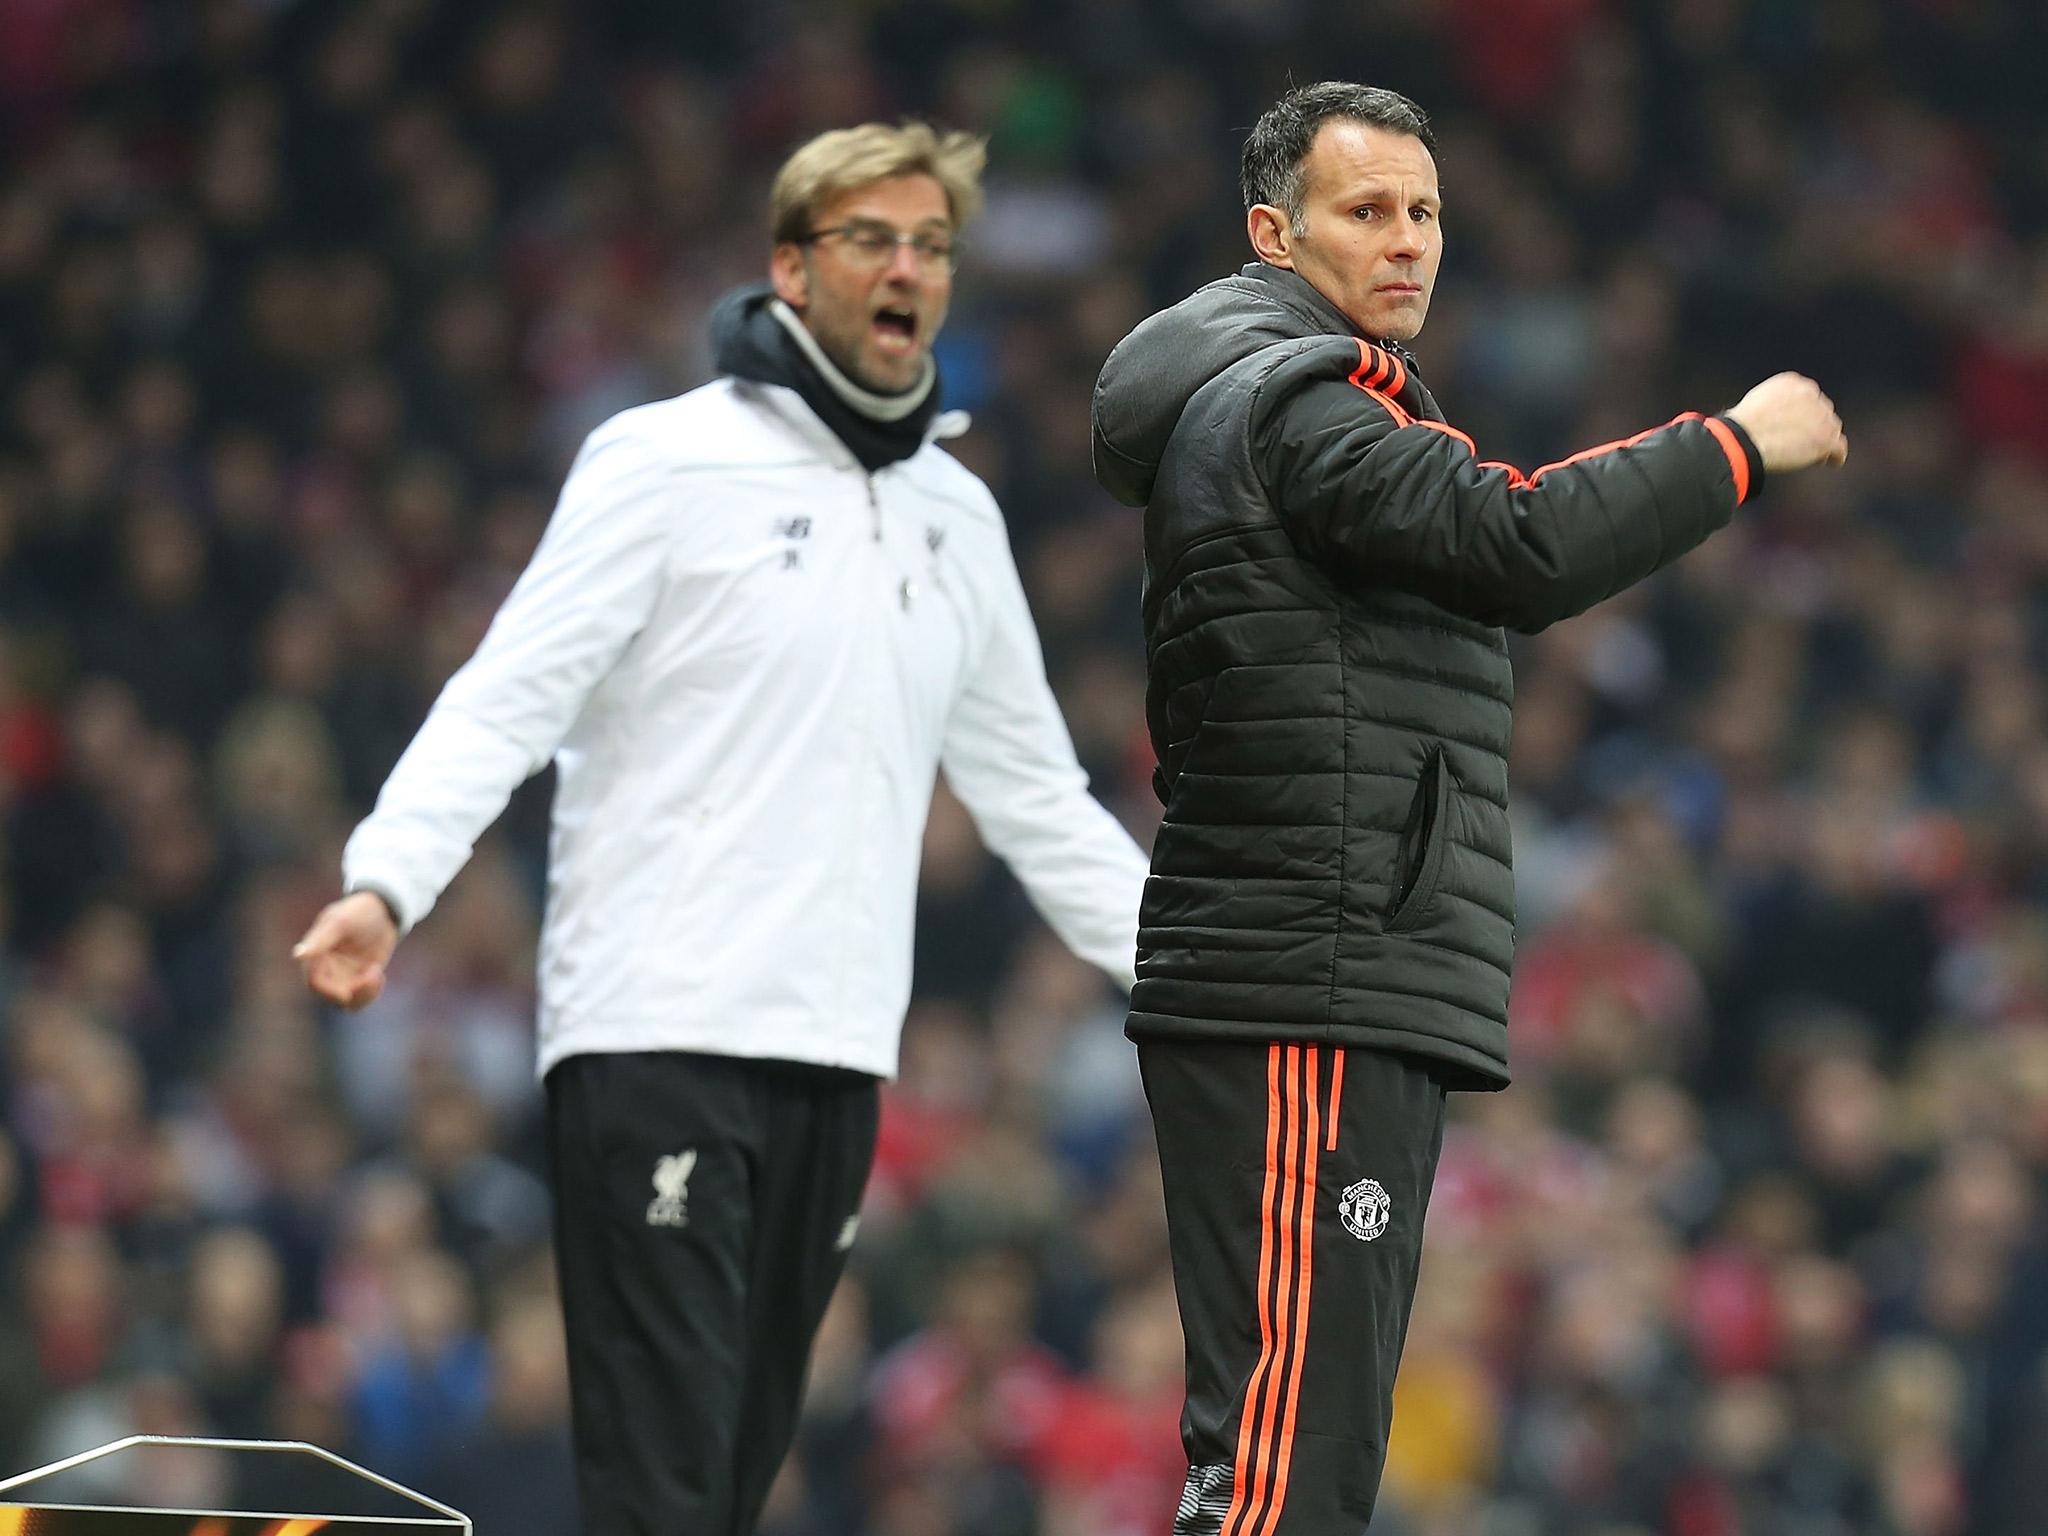 Ryan Giggs believes Jurgen Klopp's Liverpool side have a 'real chance' to win the Premier League title